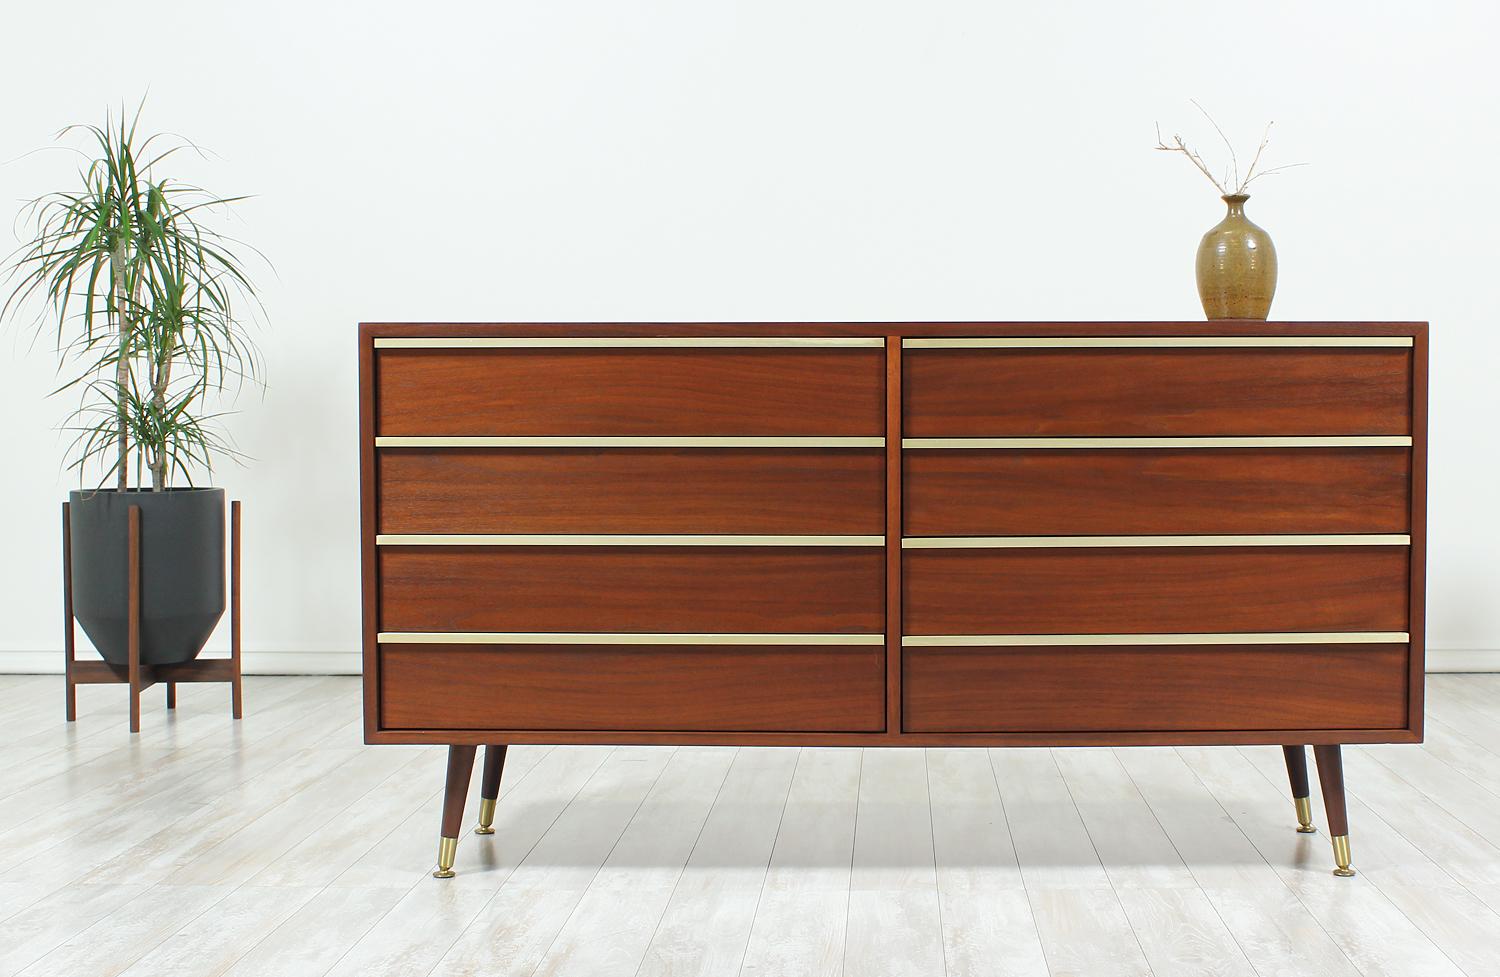 Spacious dresser designed by John Keal for Brown Saltman in the United States circa 1950s. This six-drawer dresser features a walnut wood case with long, brass pulls on each of the dovetail-constructed drawers. This exceptional dresser sits on four